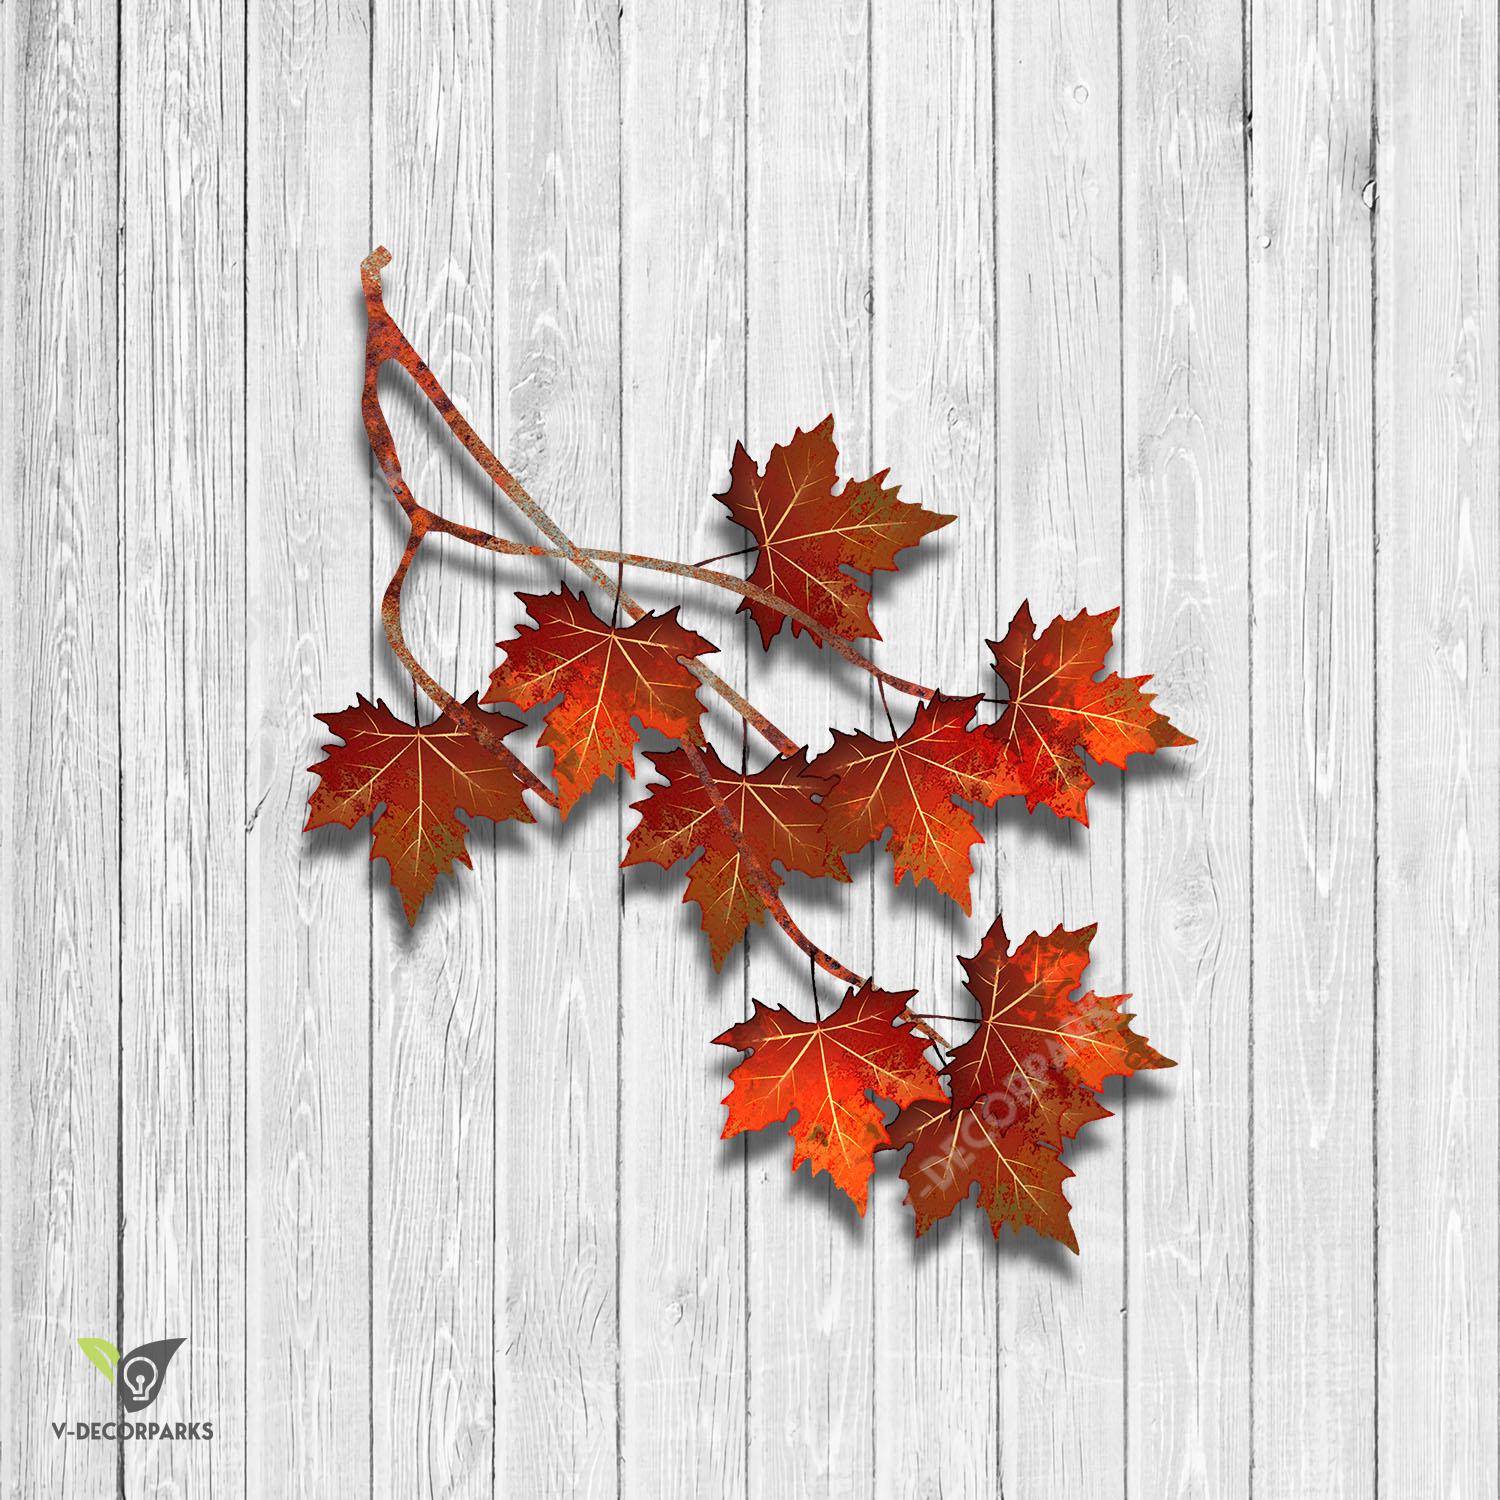 Rustic Maple Leaves Metal Art, Canadian Leaf Decorative Wall Hanging